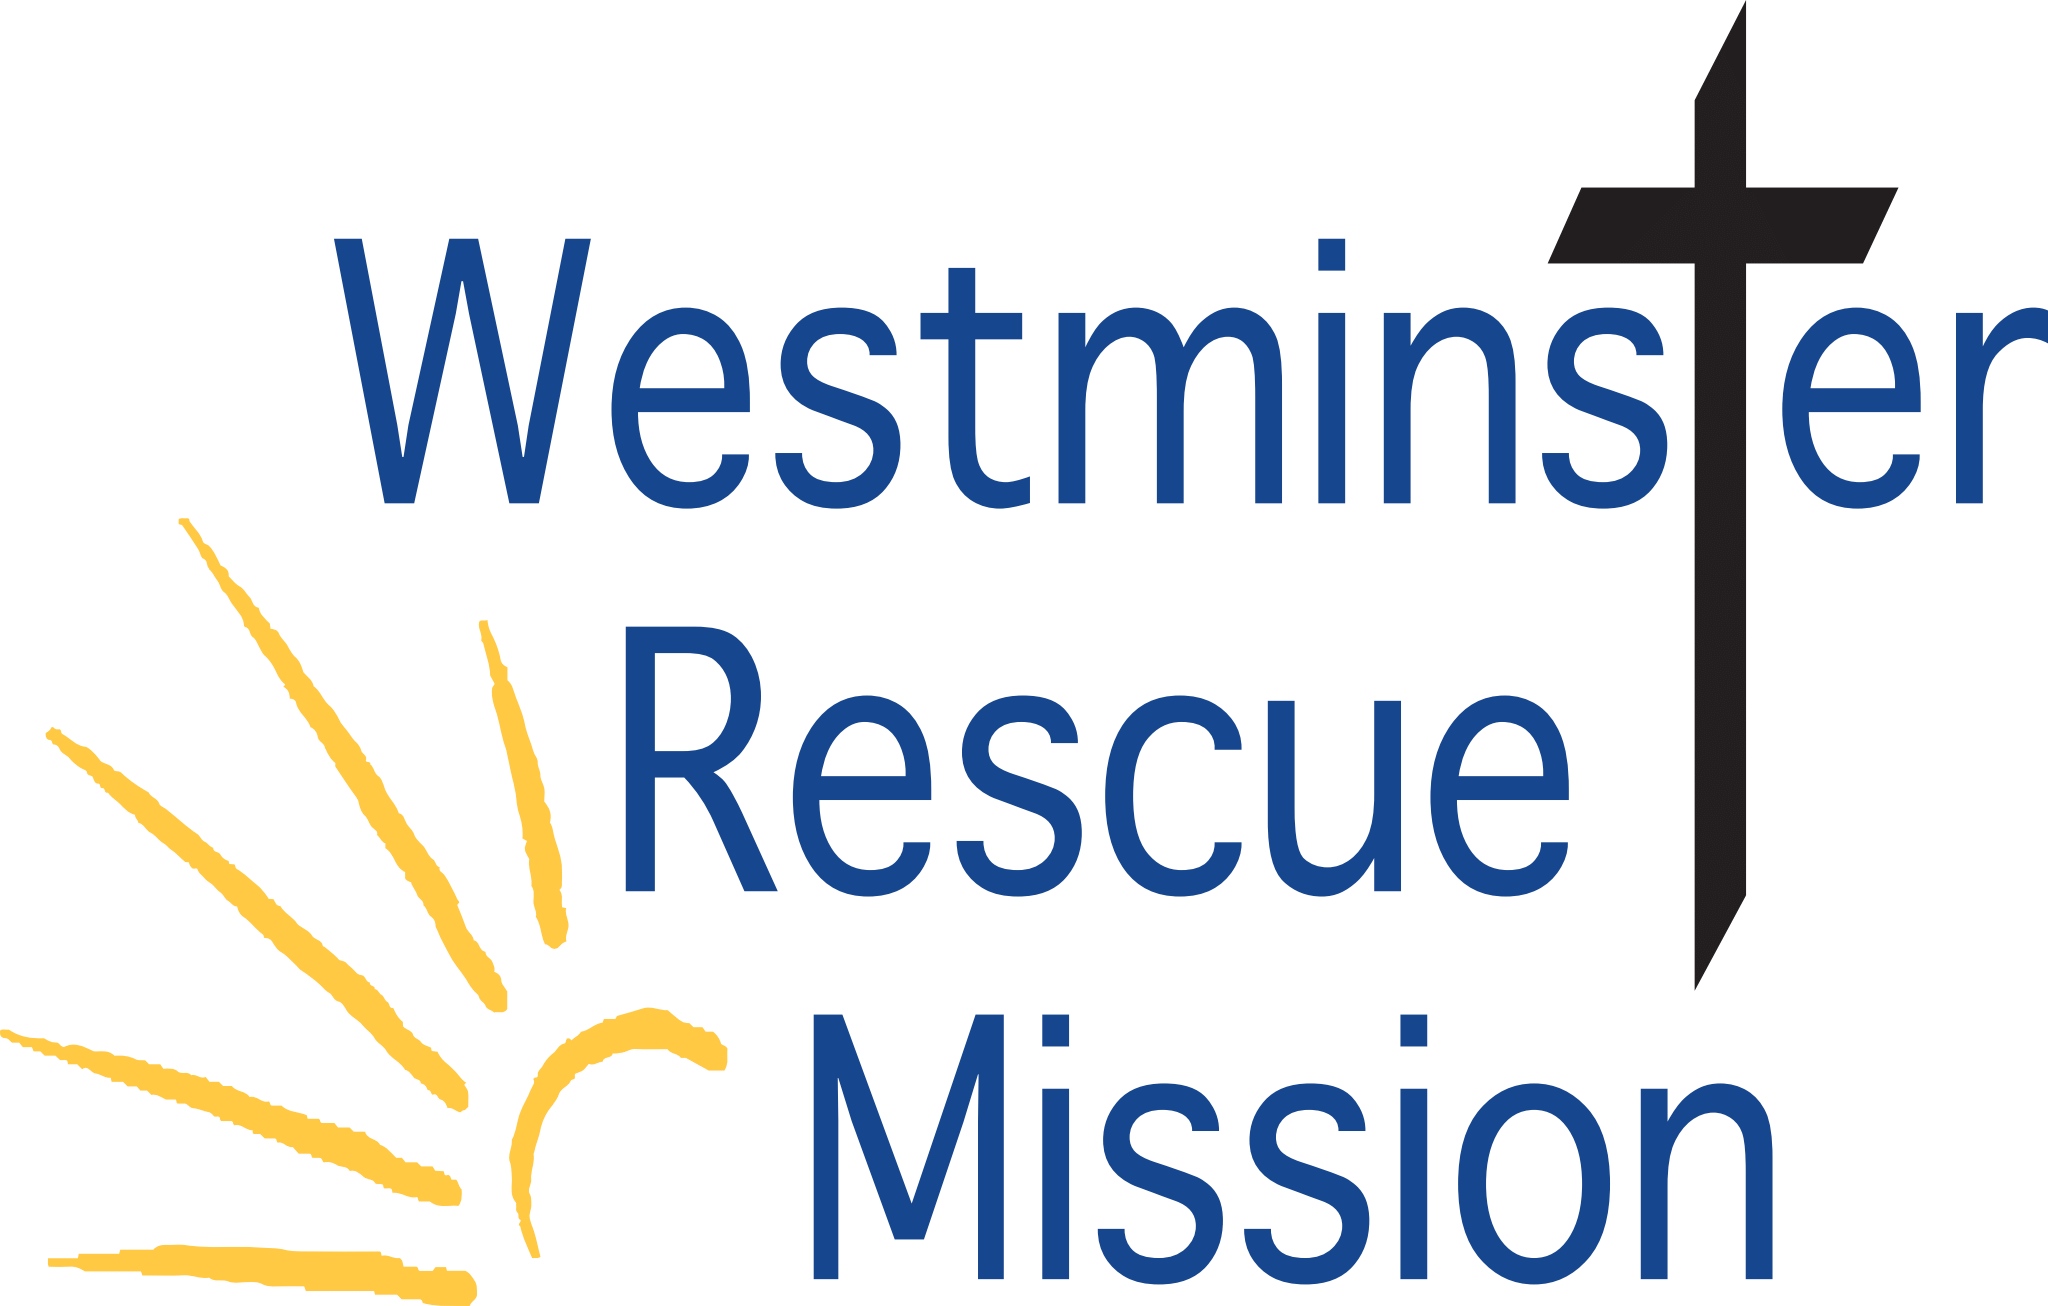 Westminster Rescue Mission